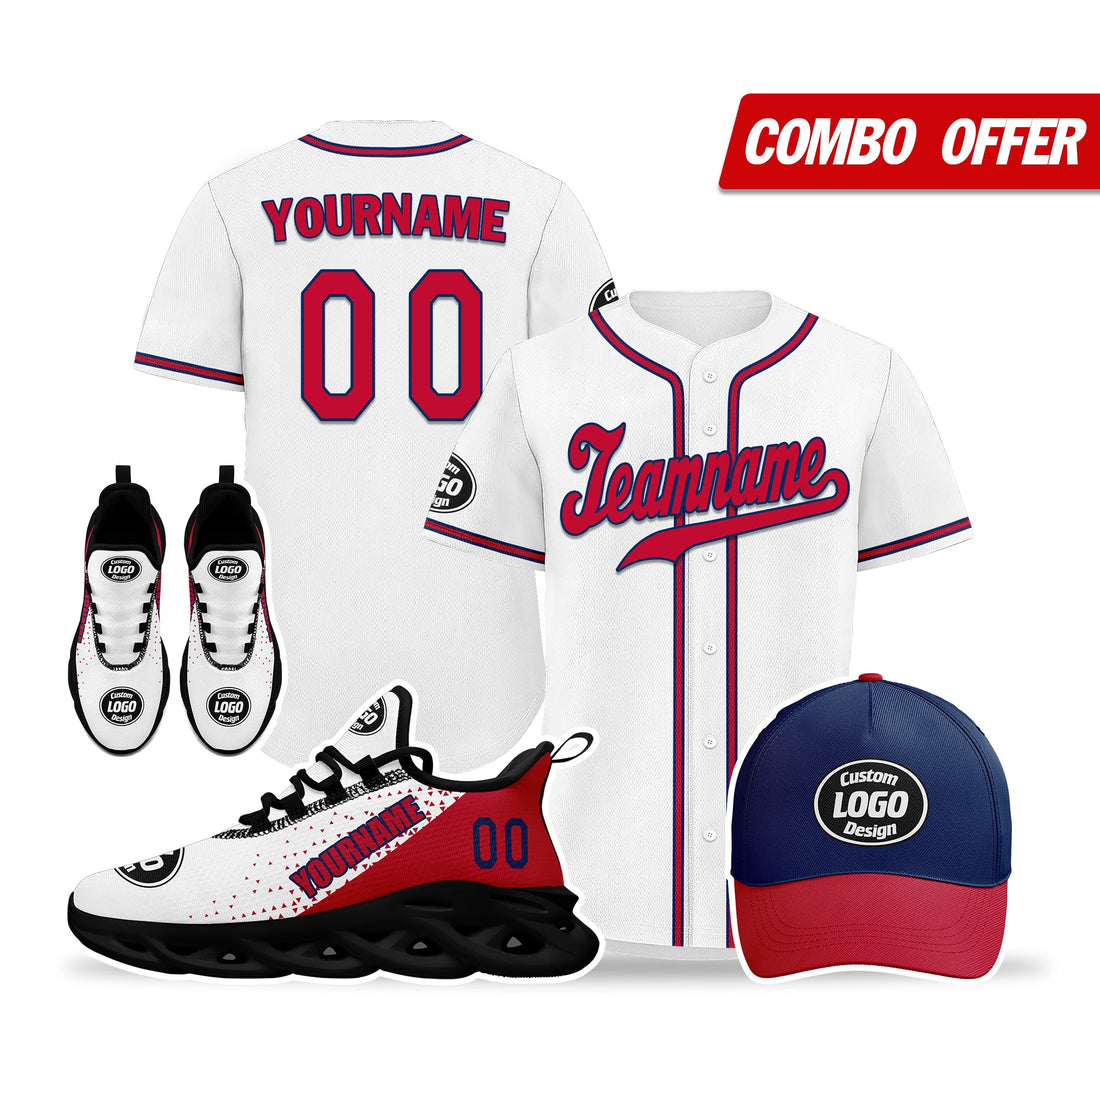 Custom White Red Jersey MaxSoul Shoes and Hat Combo Offer Personalized ZH-D0b009a-a